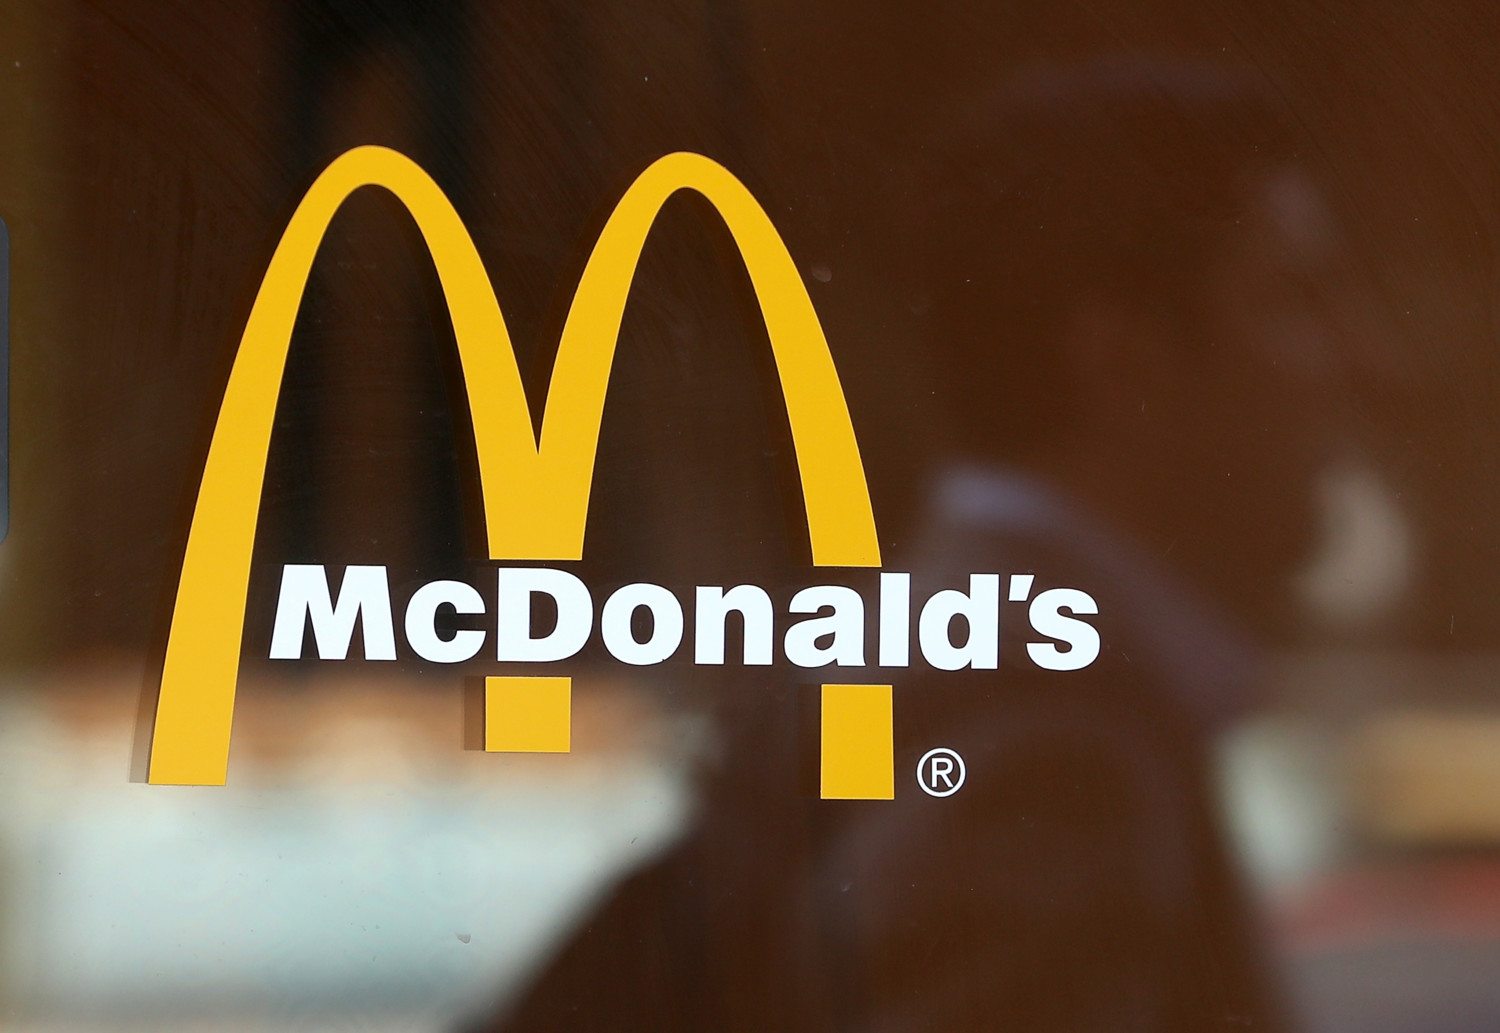 McDonald's Q4 Same Store Sales Growth Rises To Highest Level In 6 Years